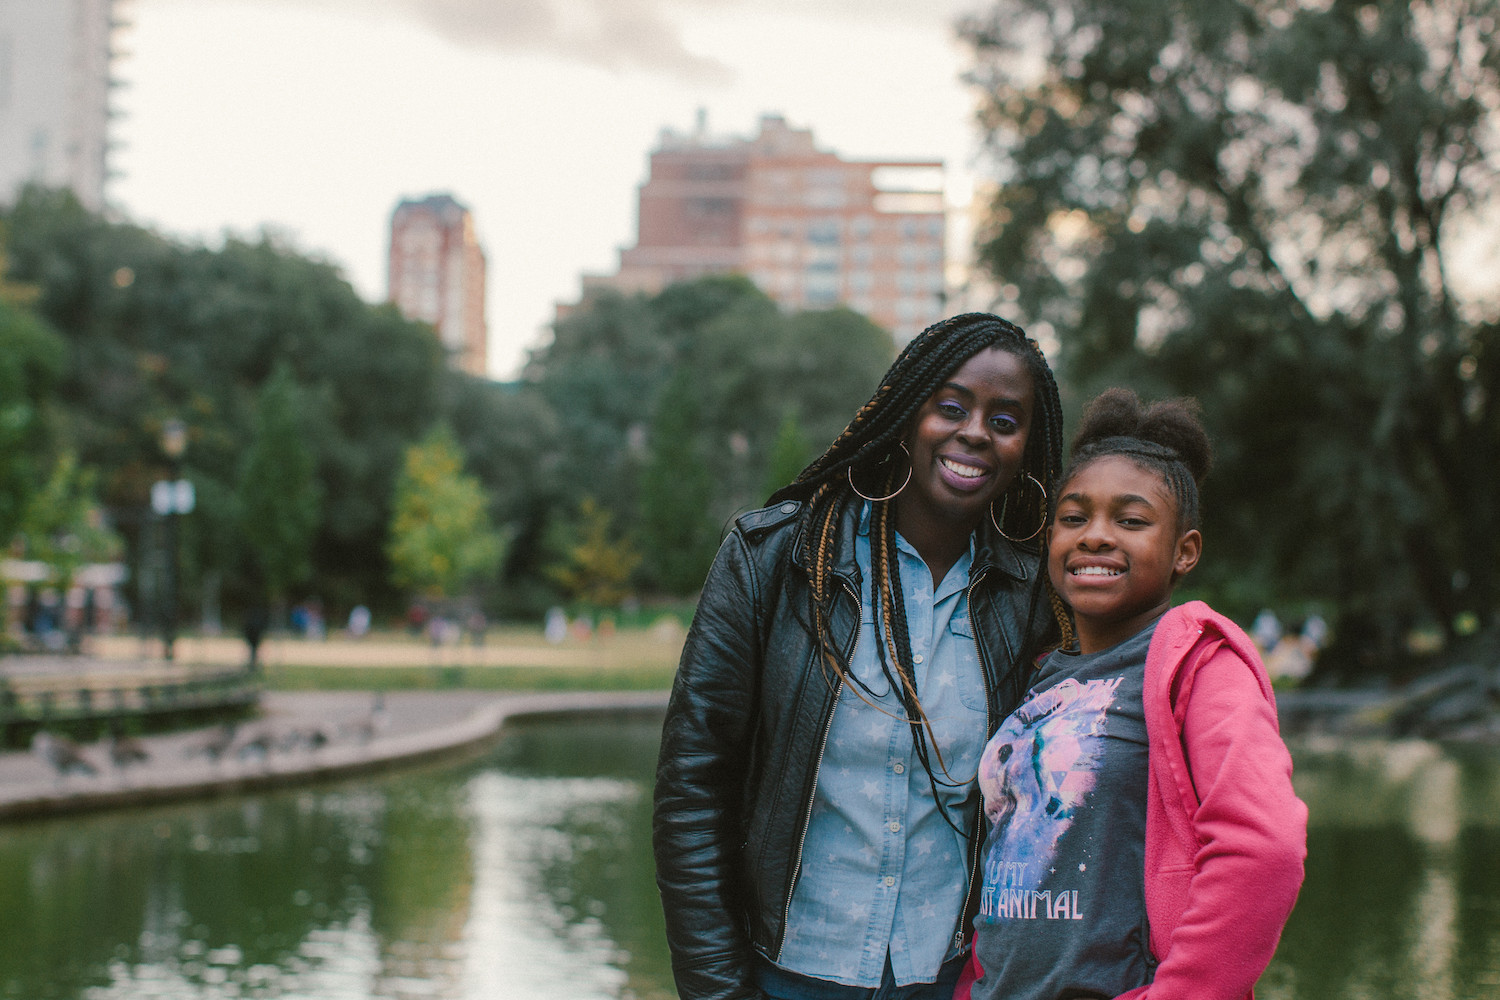 A mentor and her mentee pose for a photo by a pond in a park